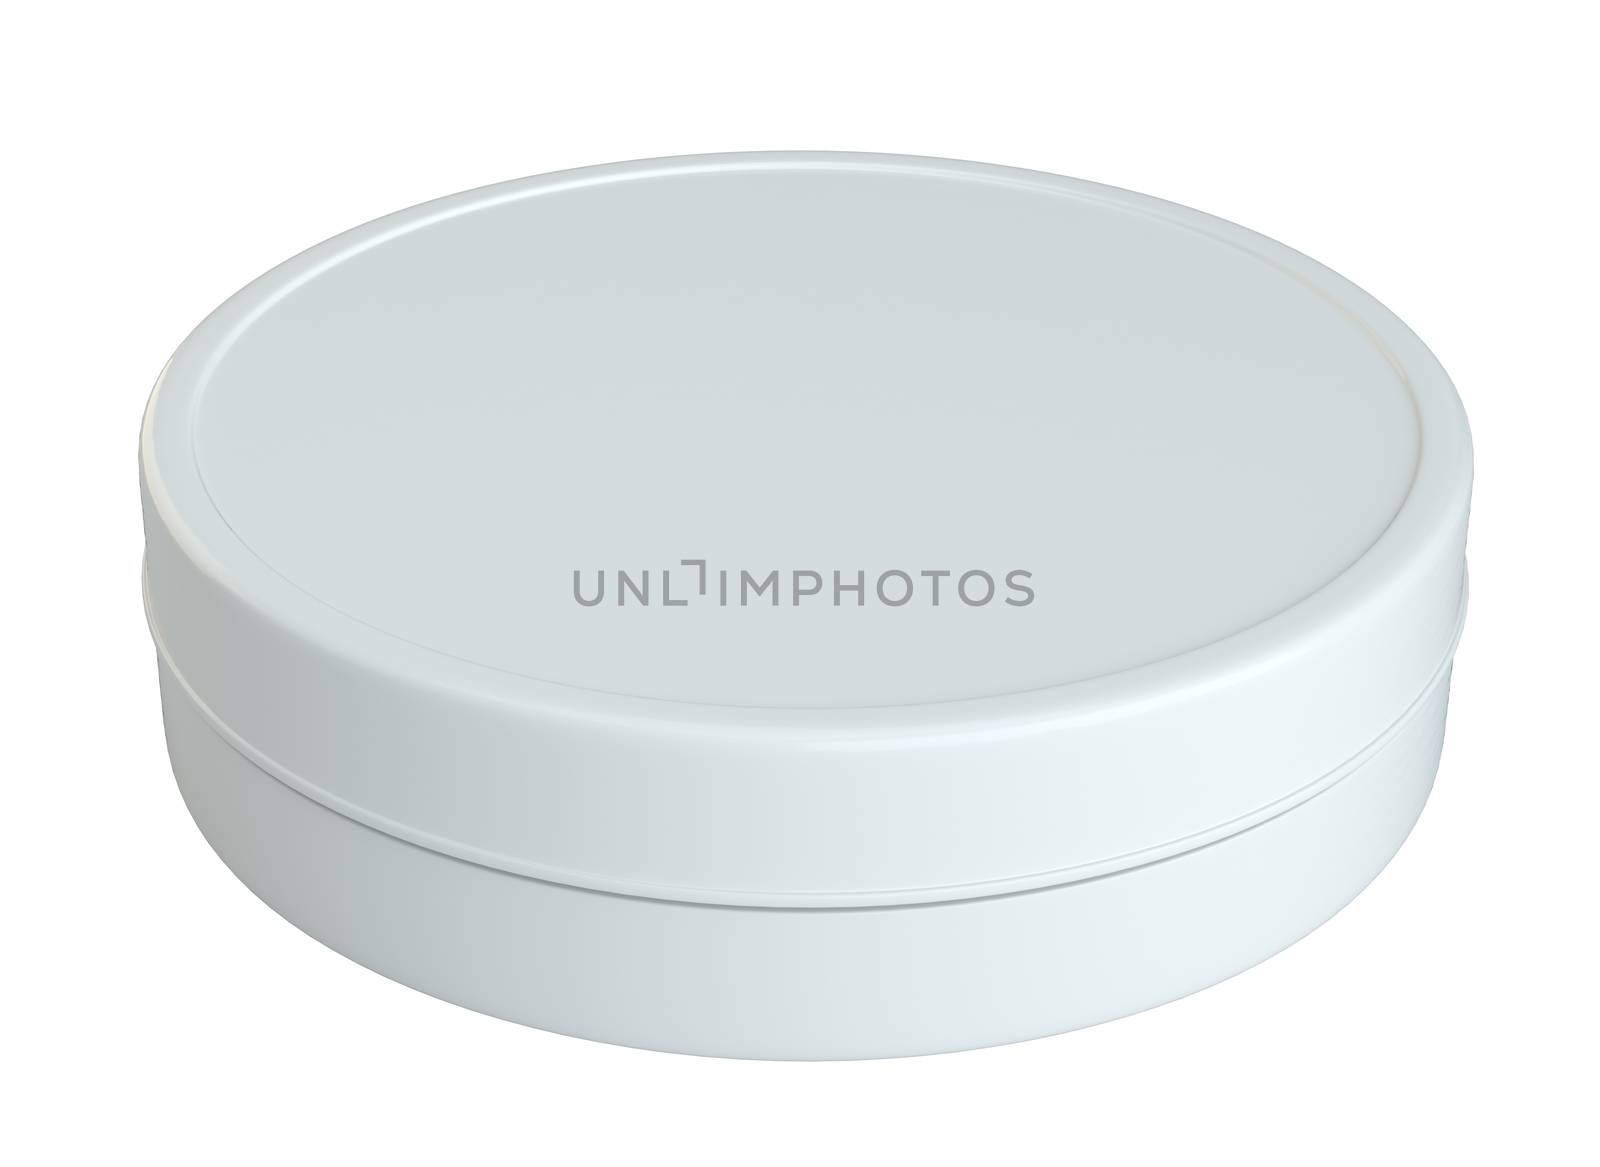 Product Packing. Empty White Clean Closed Cream Can. On White Background Isolated. For Your Design. 3D Illustration